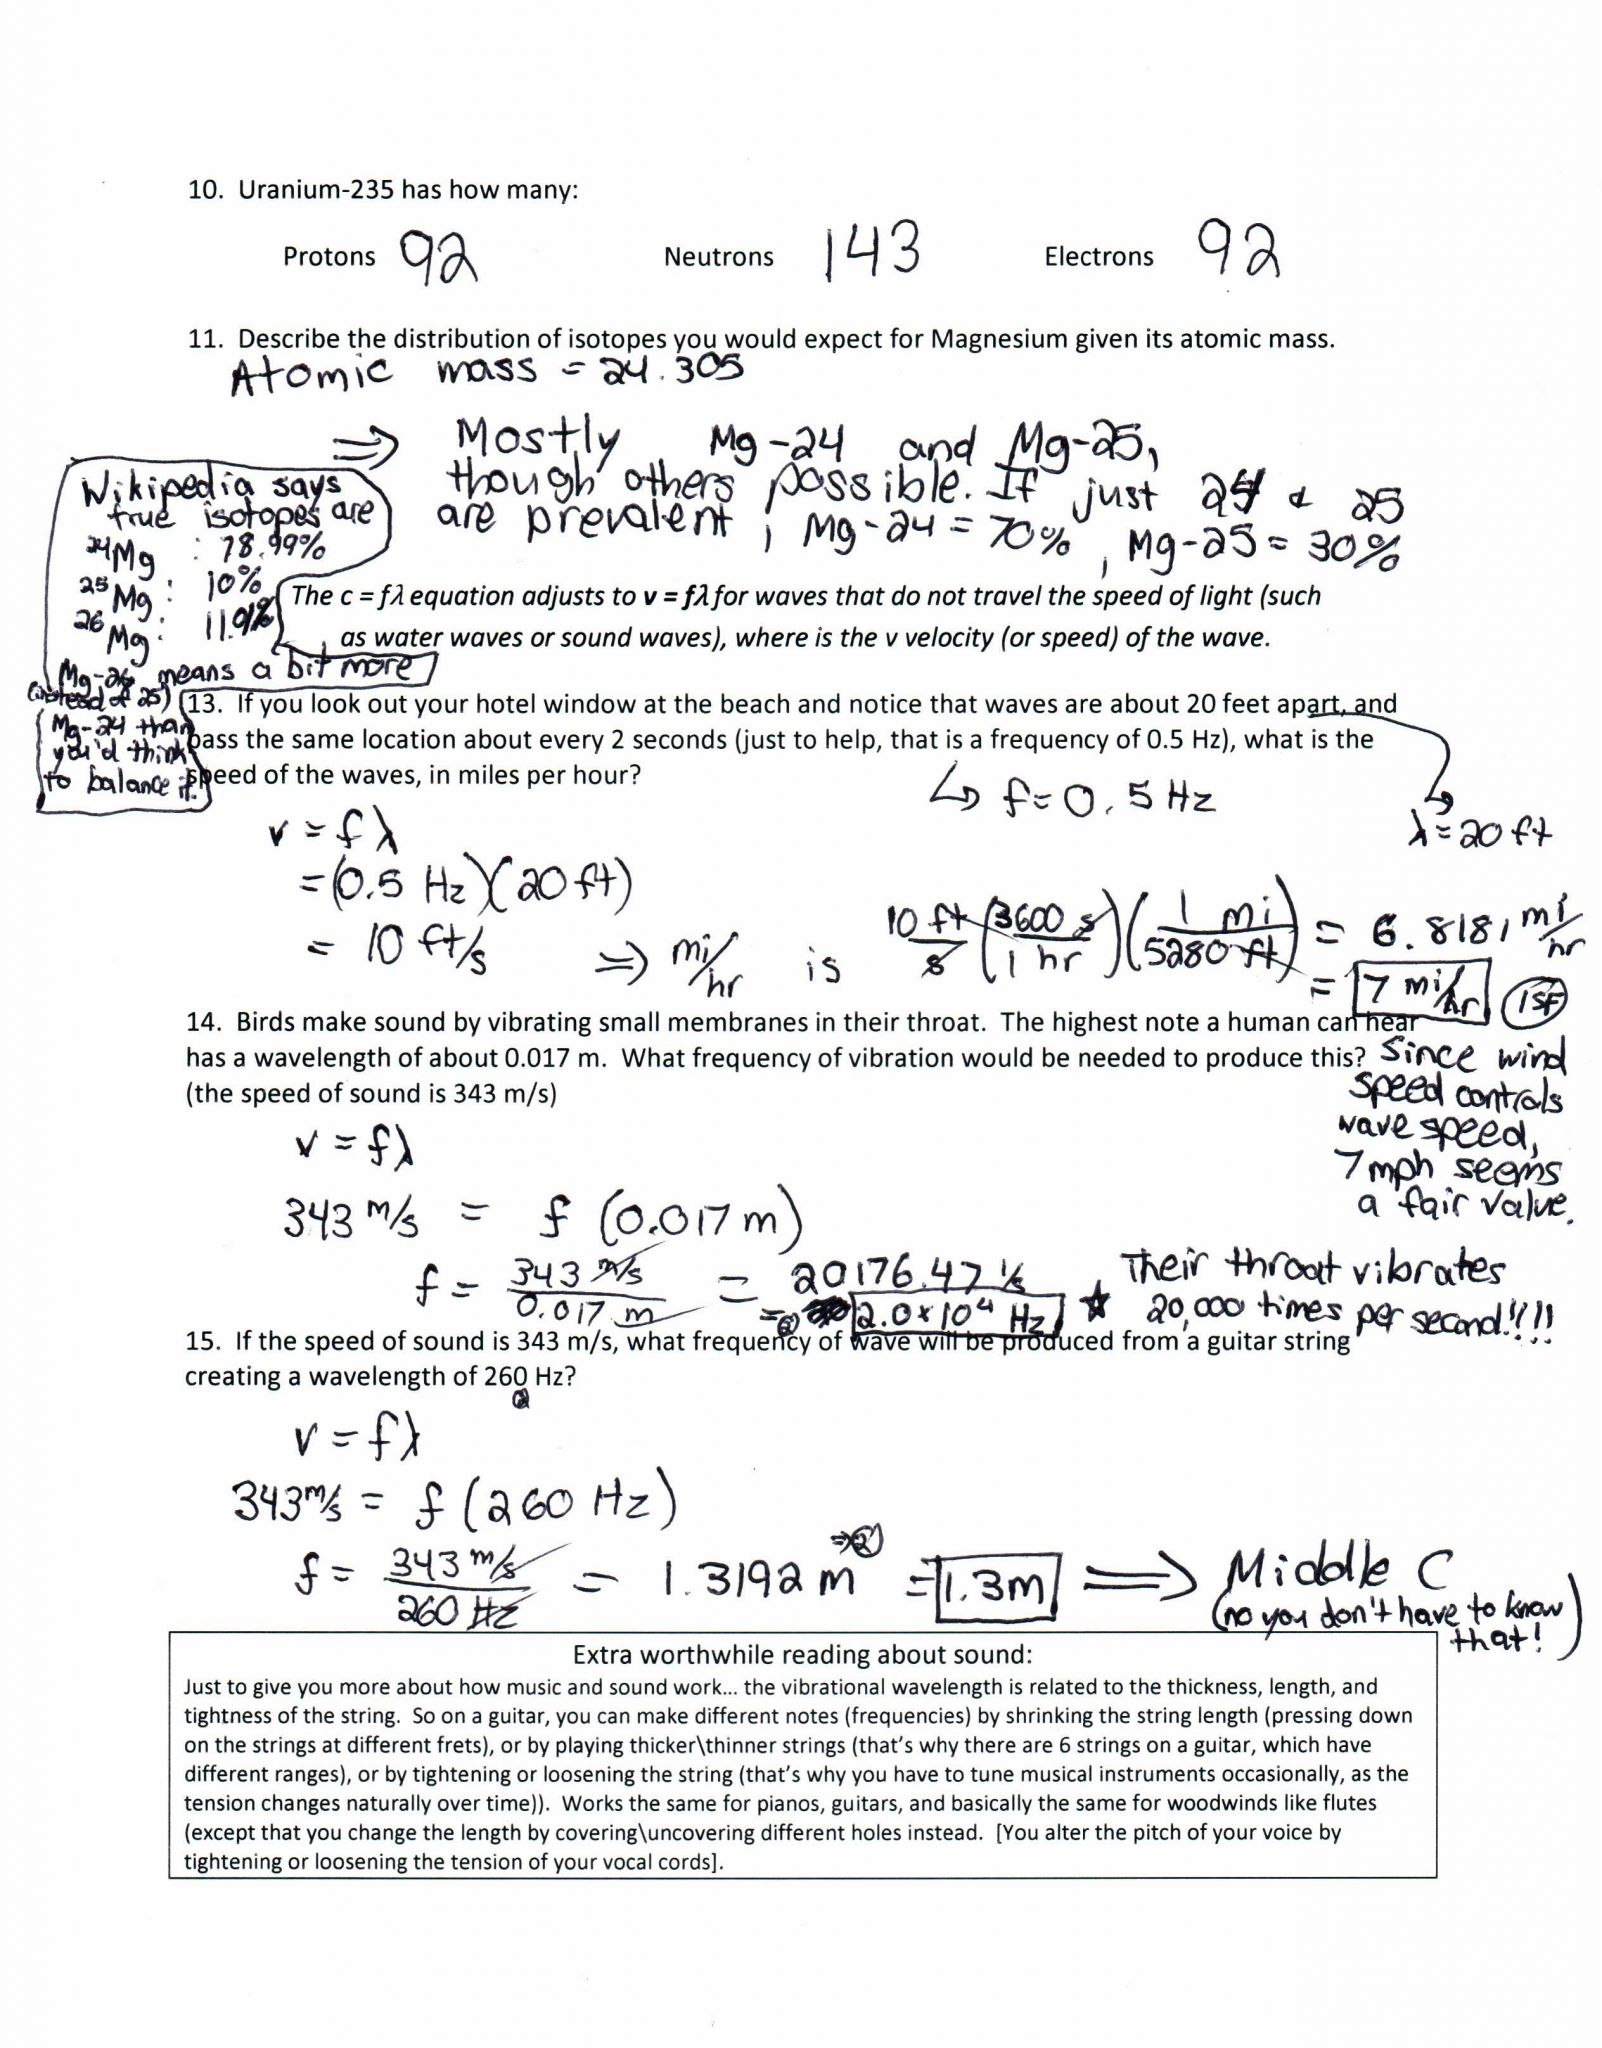 Monohybrid Cross Problems Worksheet with Answers with Ideal Gas Law Worksheet Key Worksheet for Kids In English